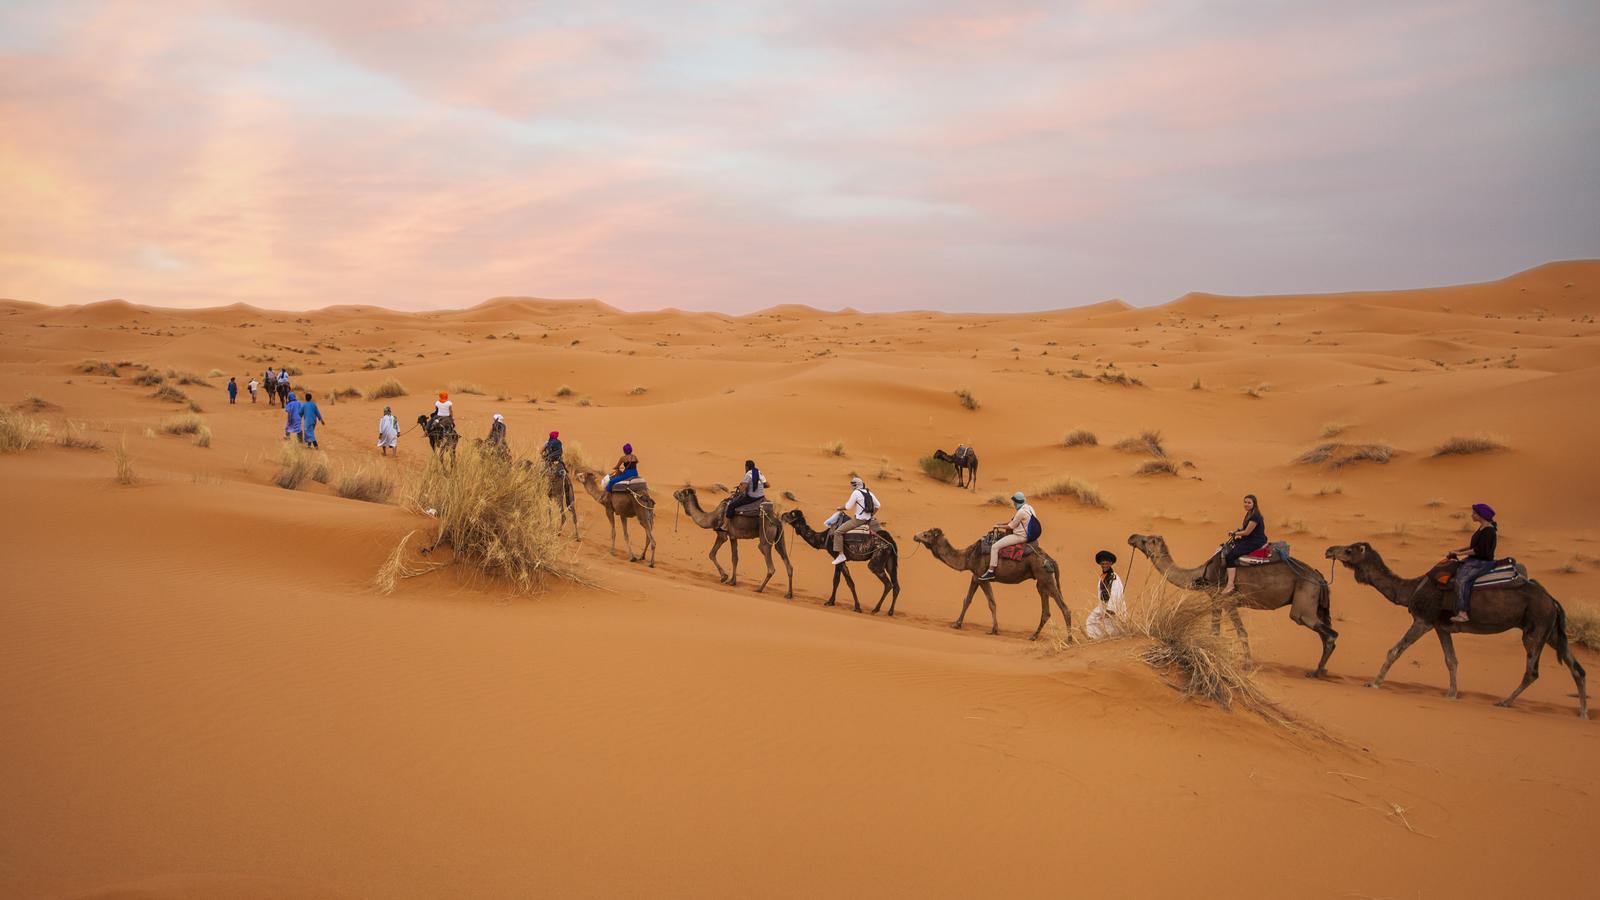 Moroccan Desert Adventure: River Canyons & Camels